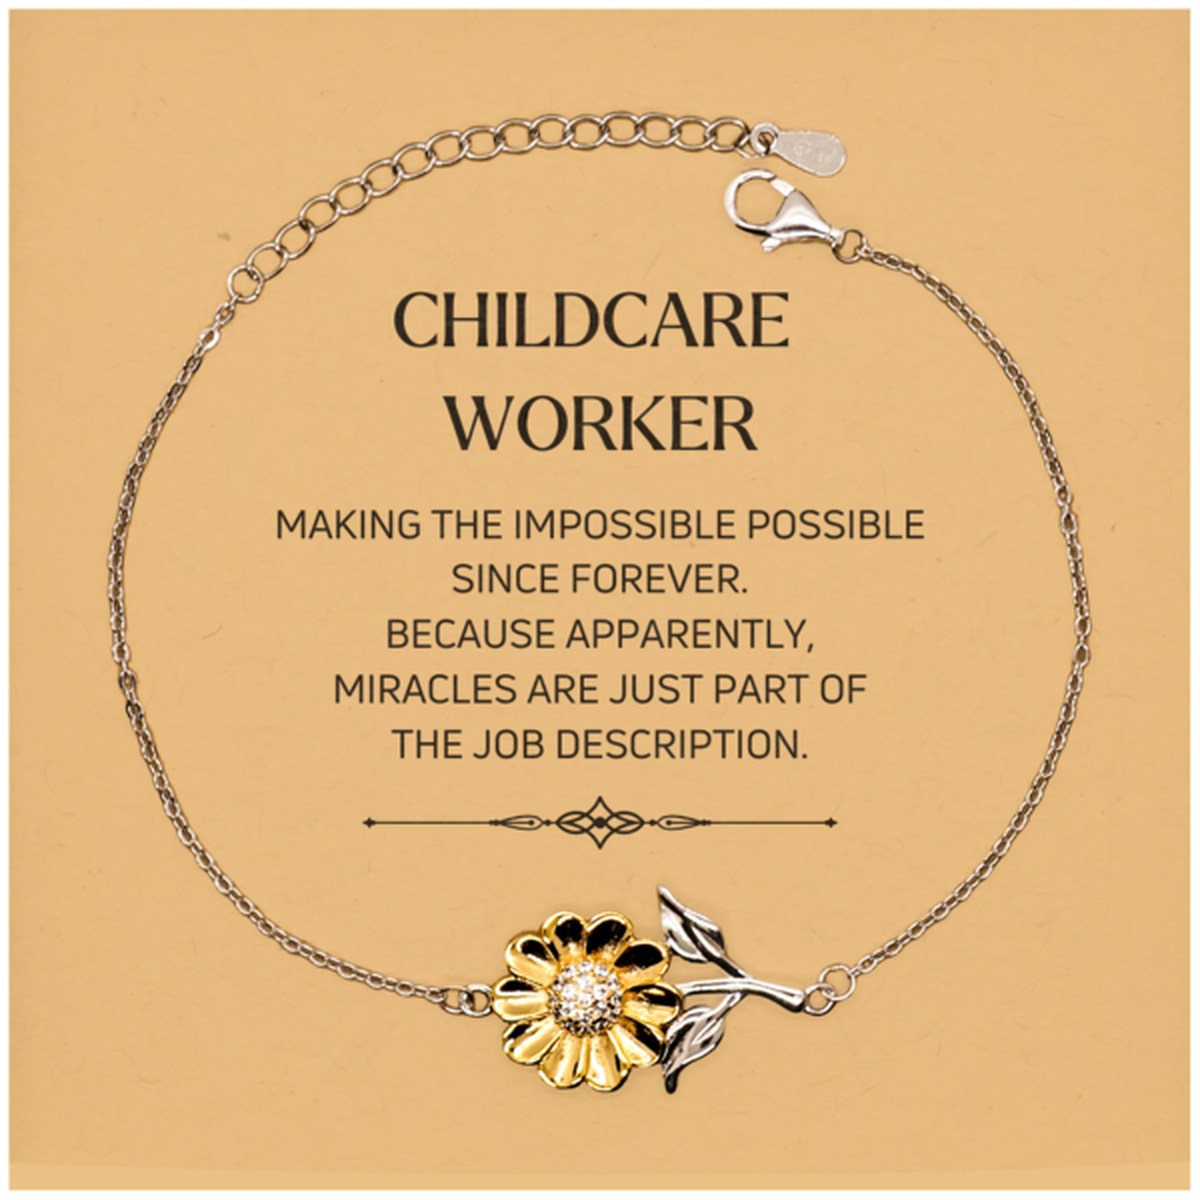 Funny Childcare Worker Gifts, Miracles are just part of the job description, Inspirational Birthday Christmas Sunflower Bracelet For Childcare Worker, Men, Women, Coworkers, Friends, Boss